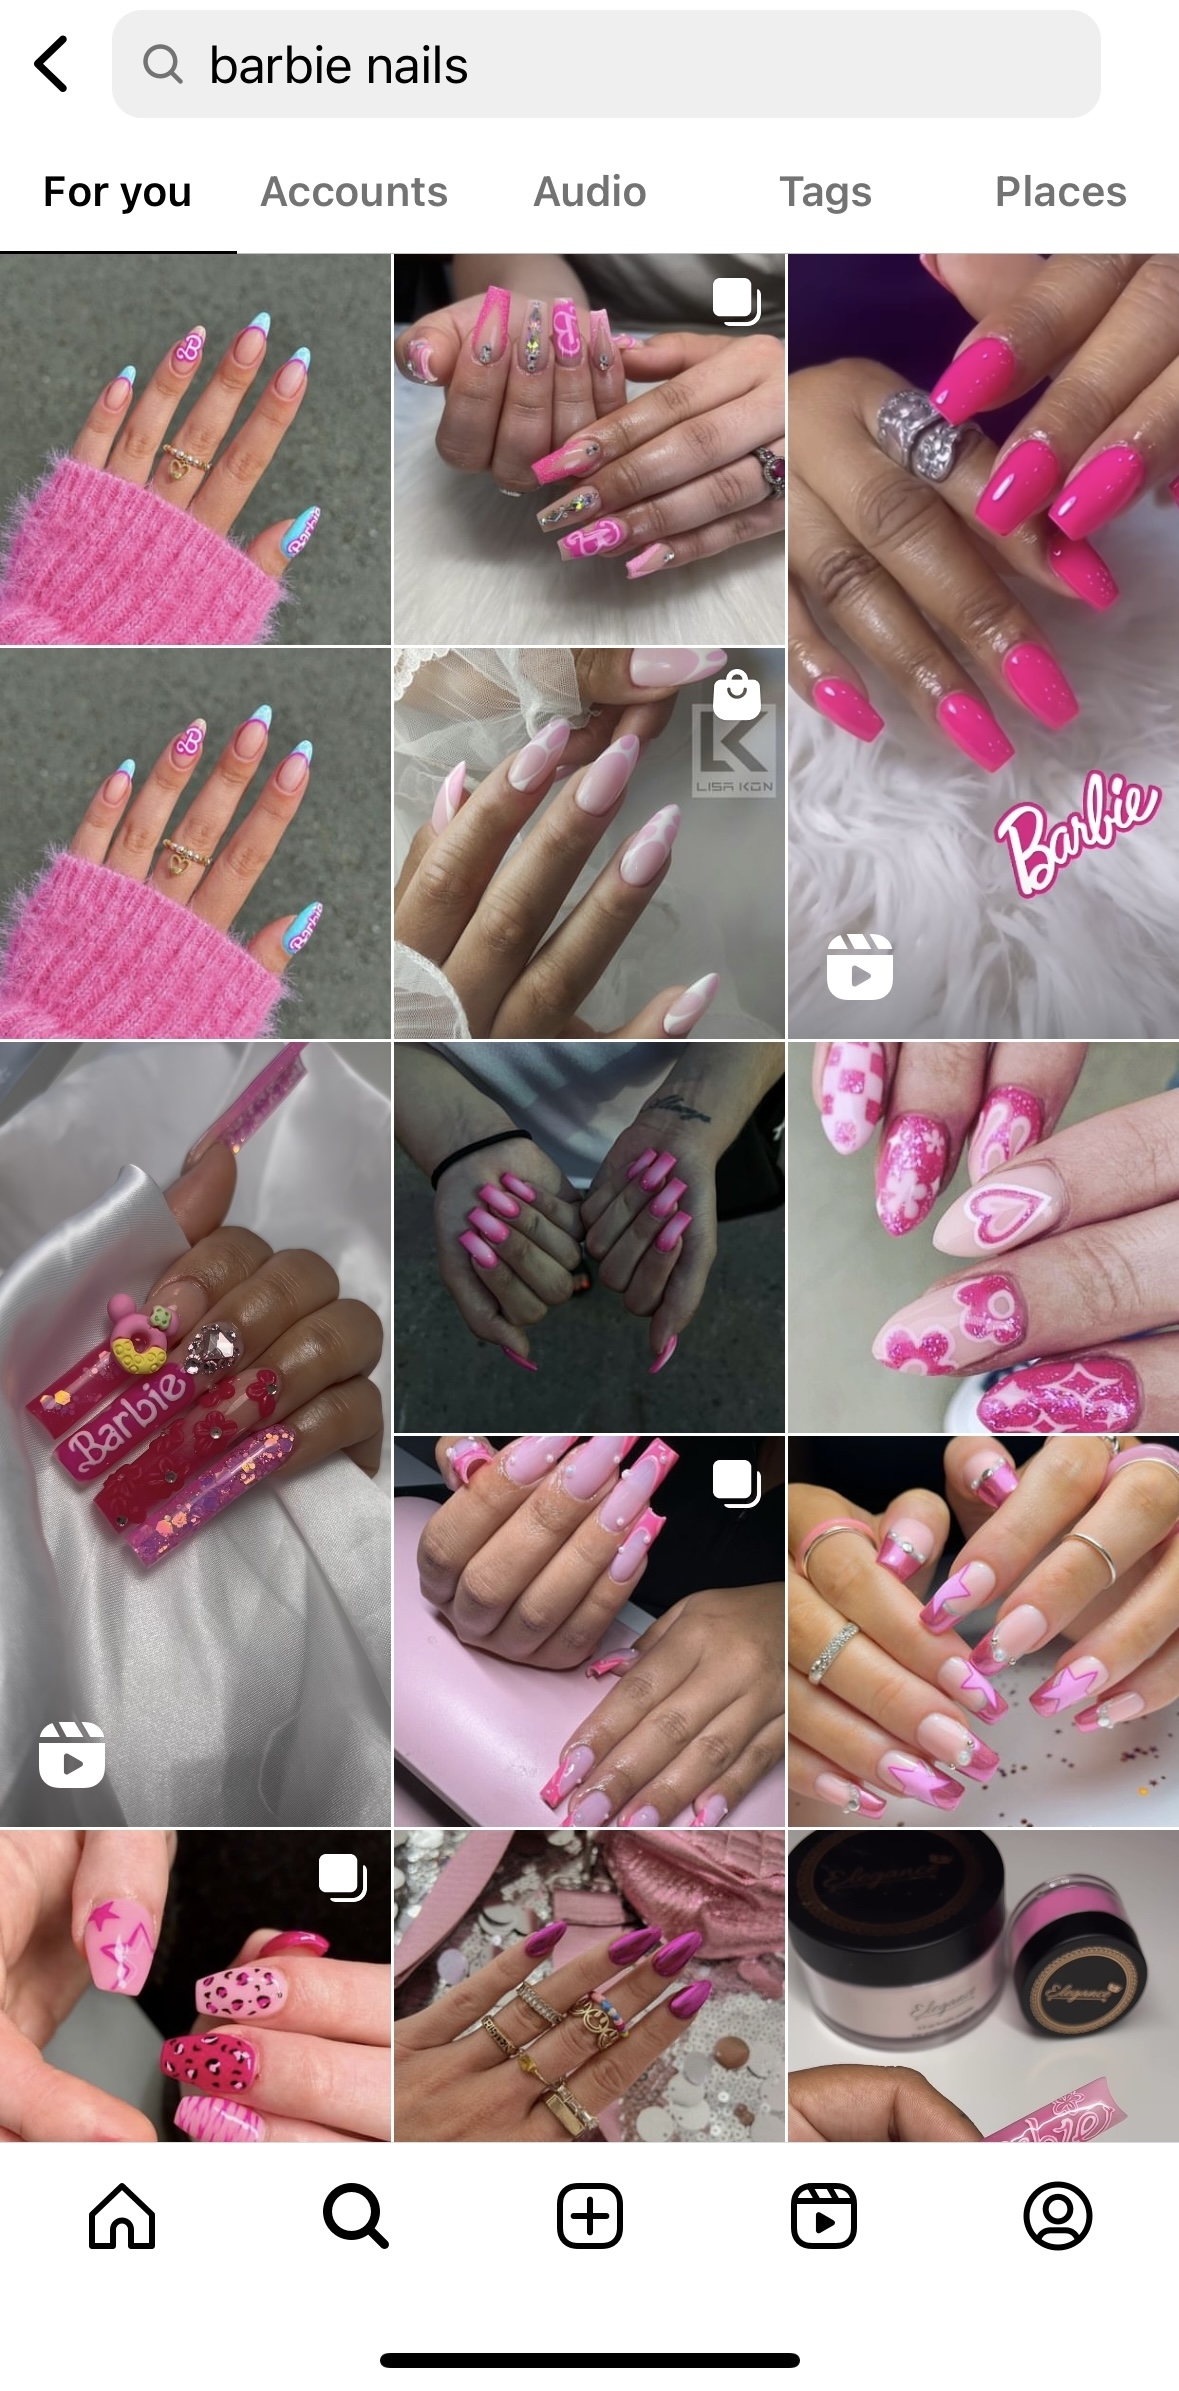 59 Barbie Nail Design Ideas to *Sparkle* This Summer